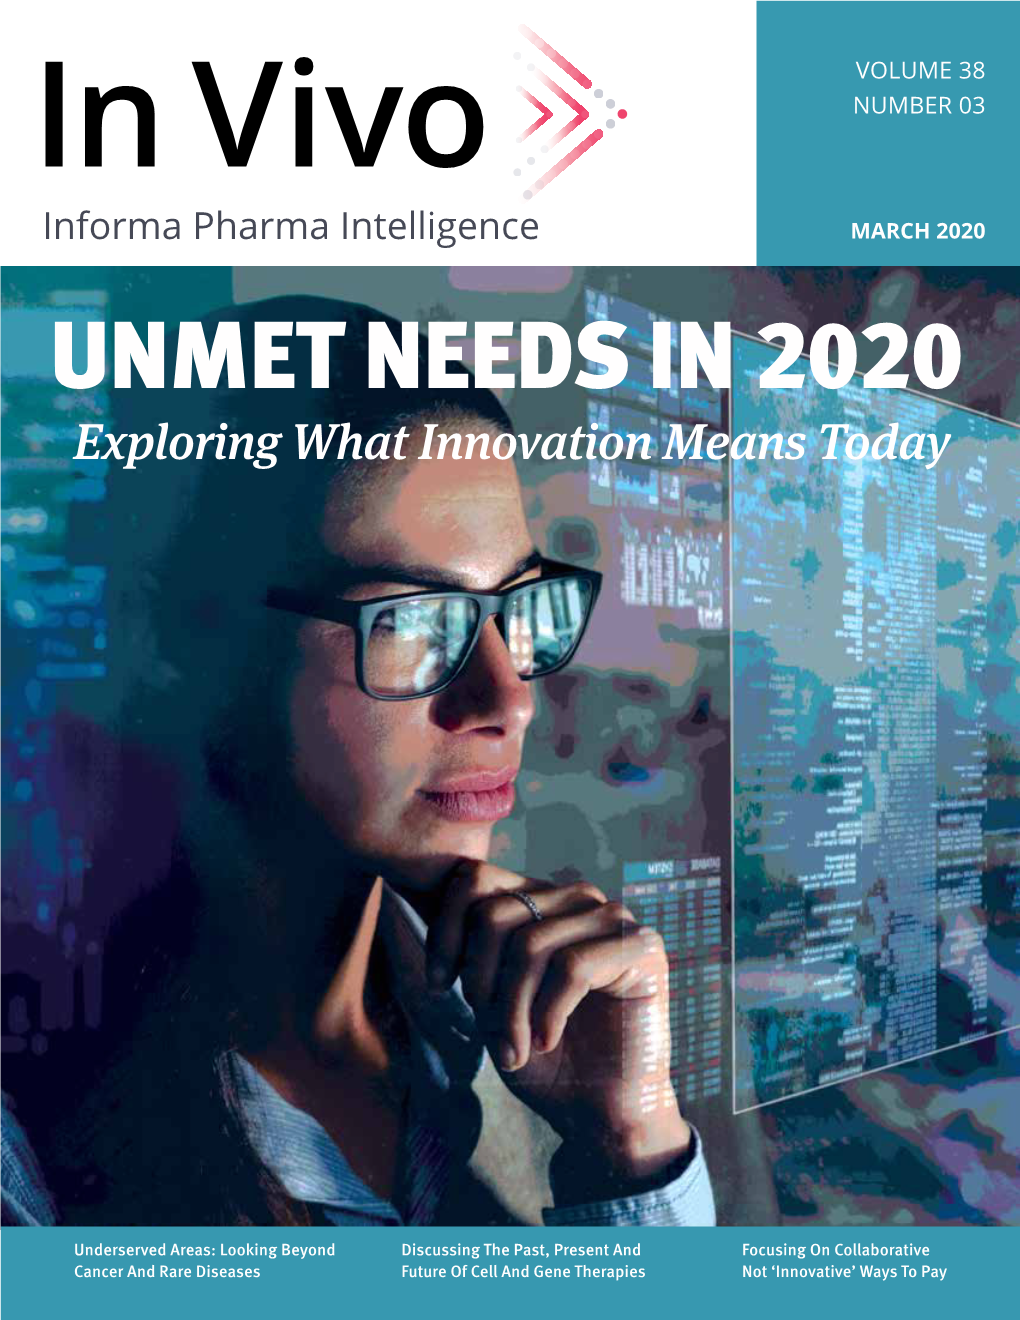 UNMET NEEDS in 2020 Exploring What Innovation Means Today